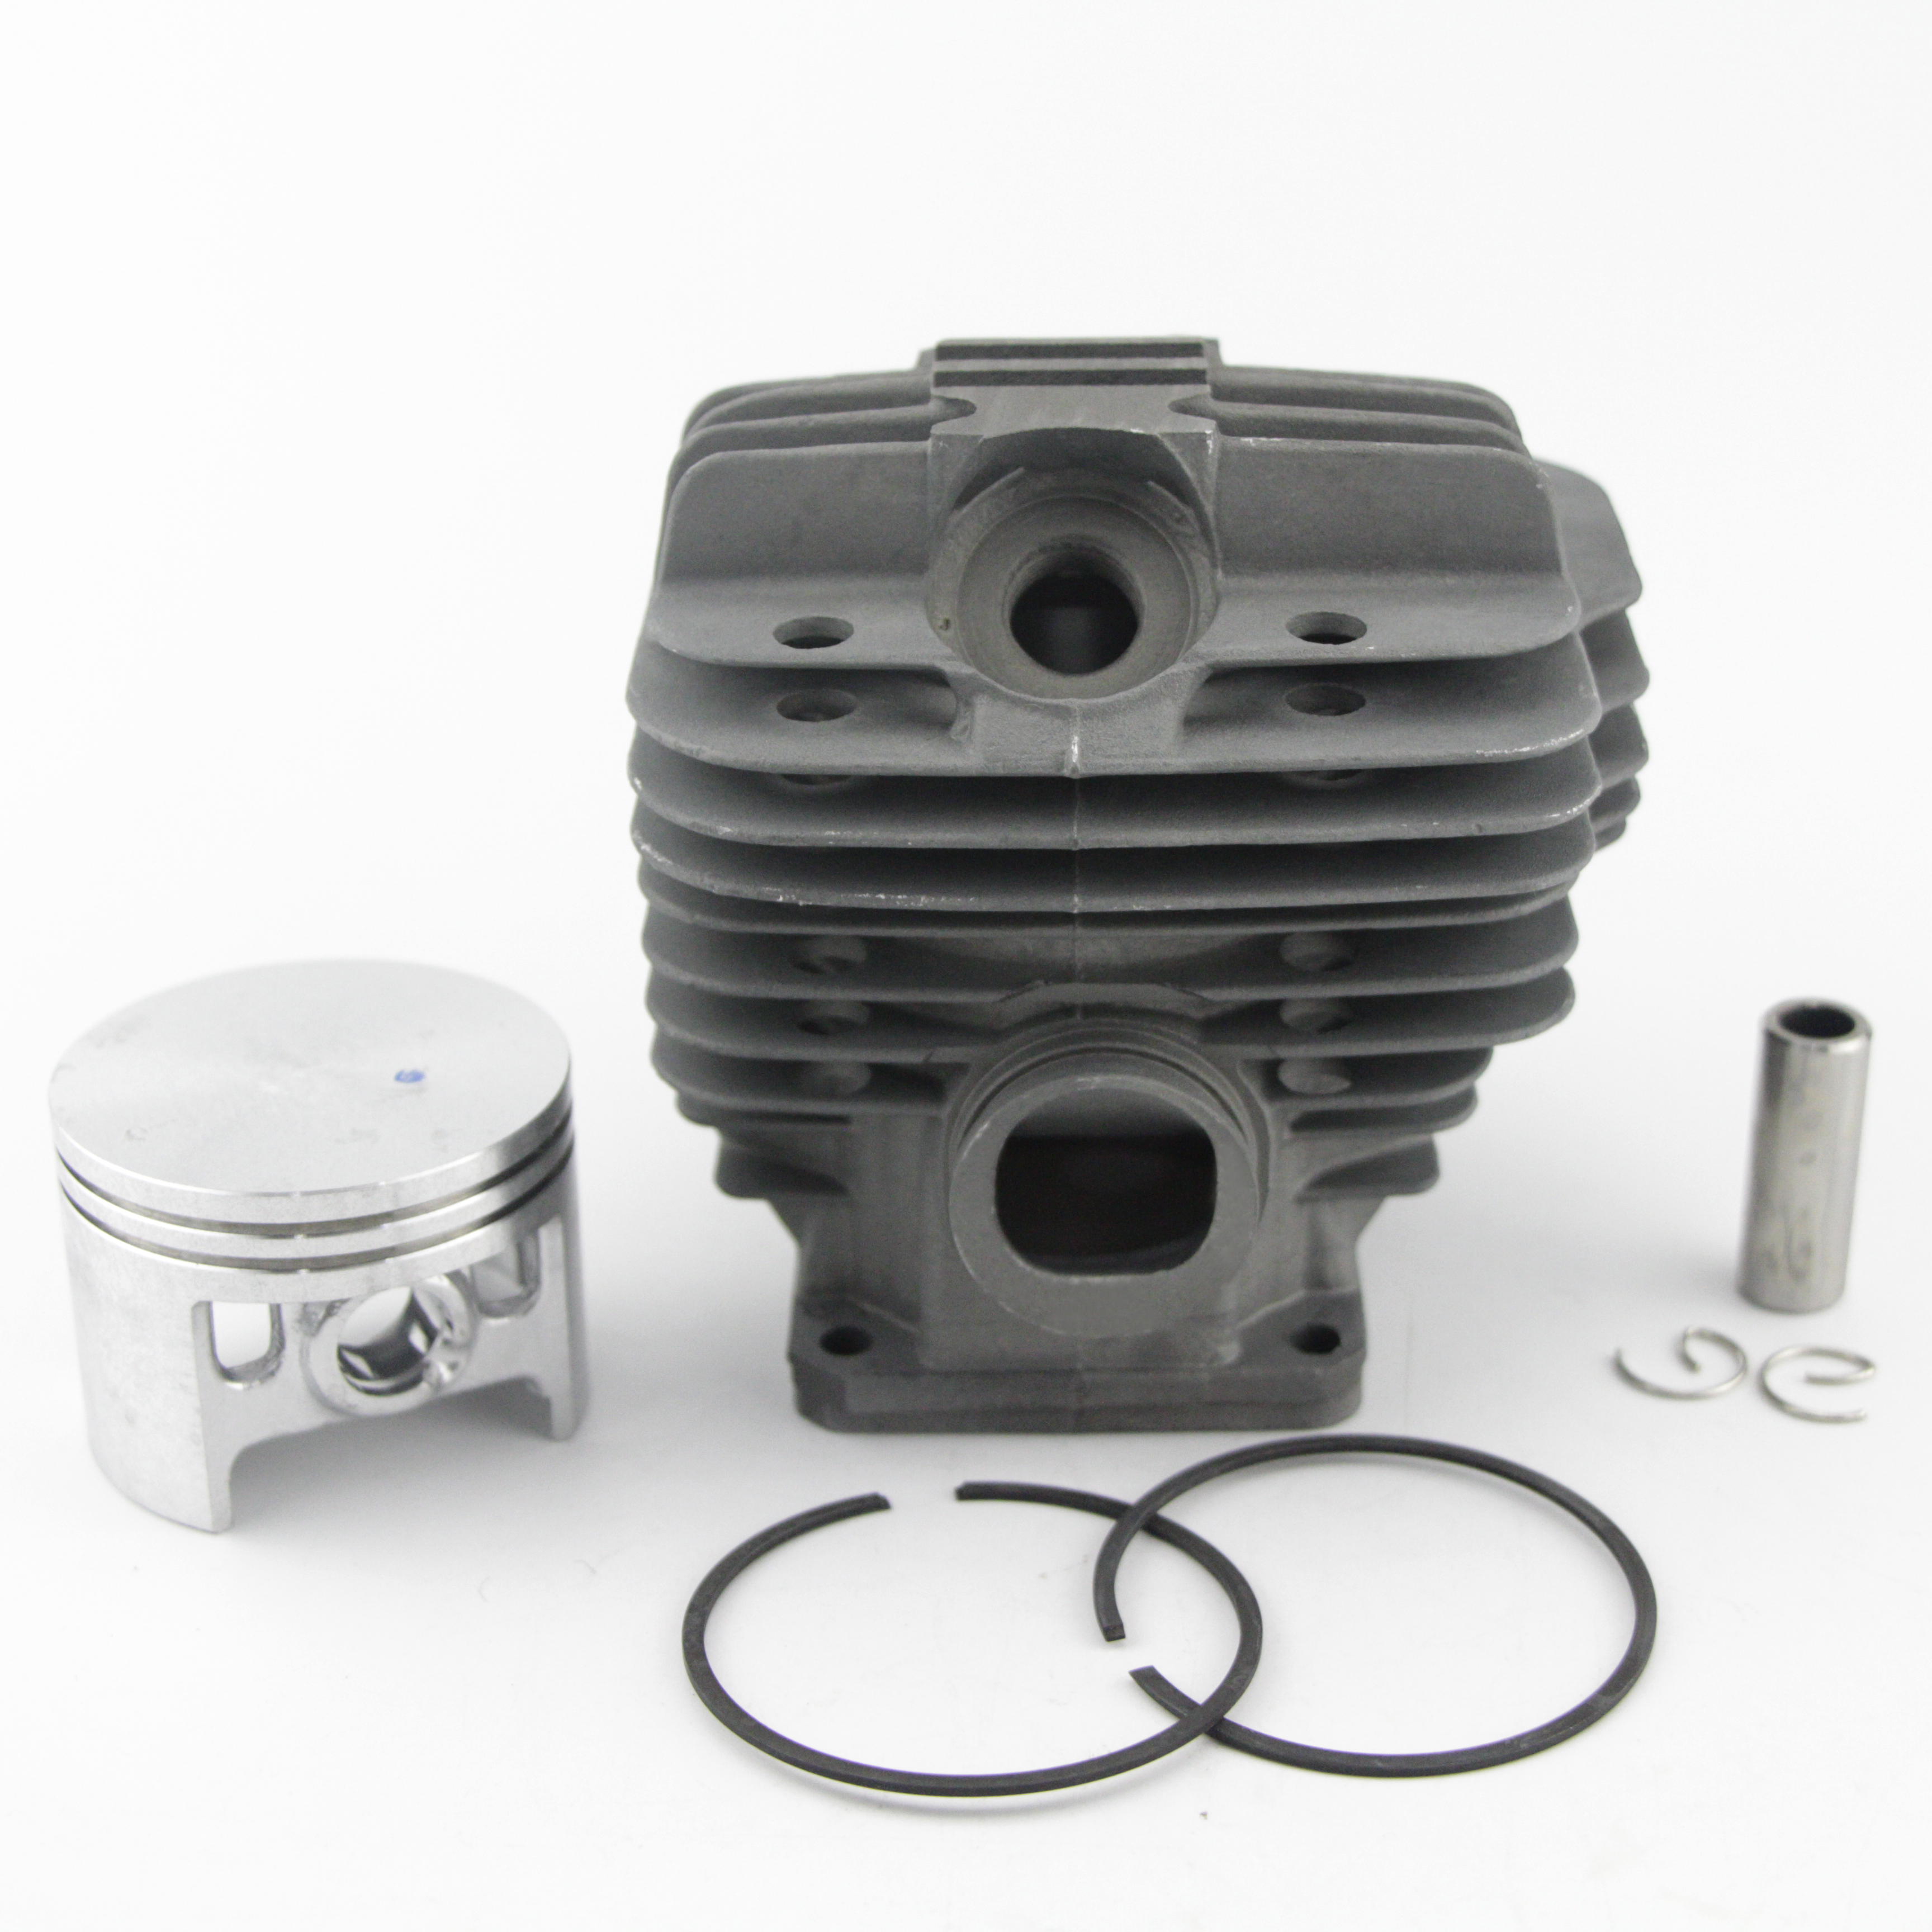 52MM Big Bore Details about   Cylinder and Piston Kit W/Decompression Port Stihl 044,MS440. 